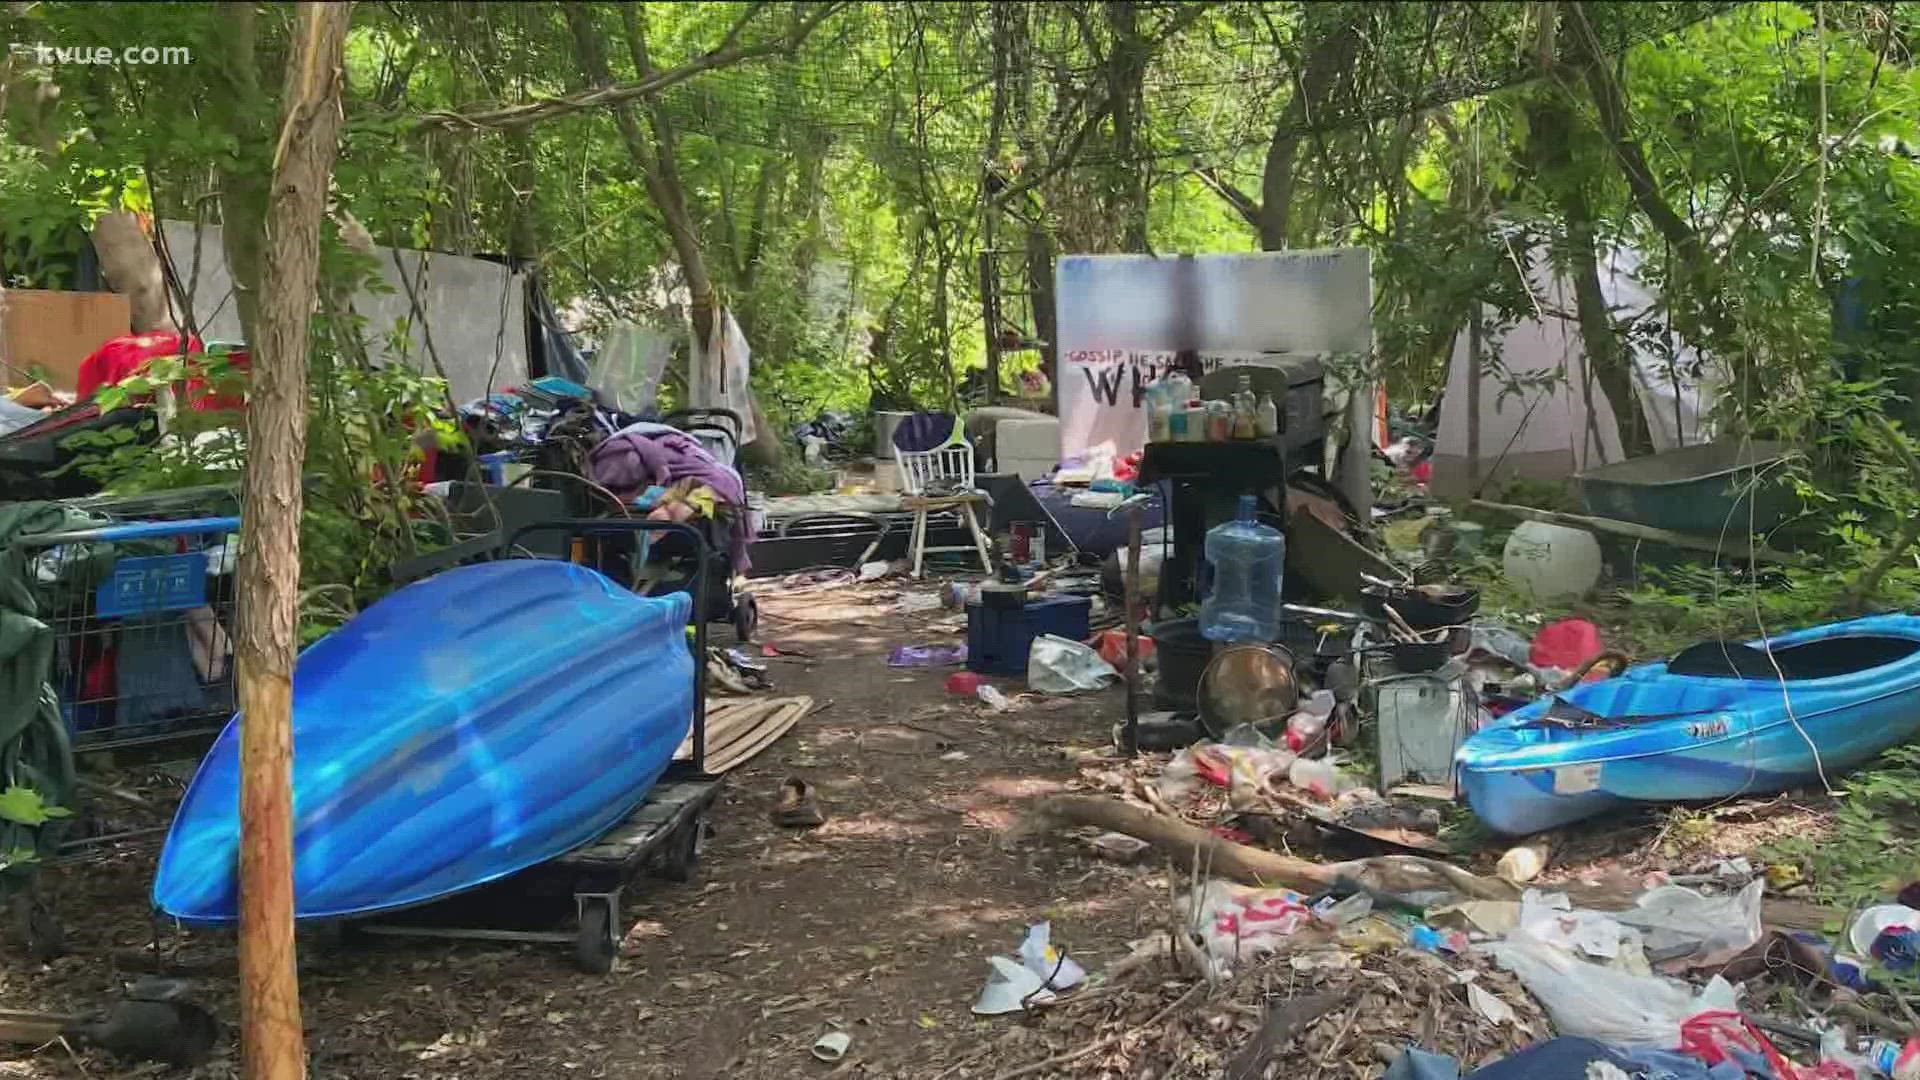 It's been nine months since the Austin City Council voted to buy a hotel in Williamson County to help people experiencing homelessness.